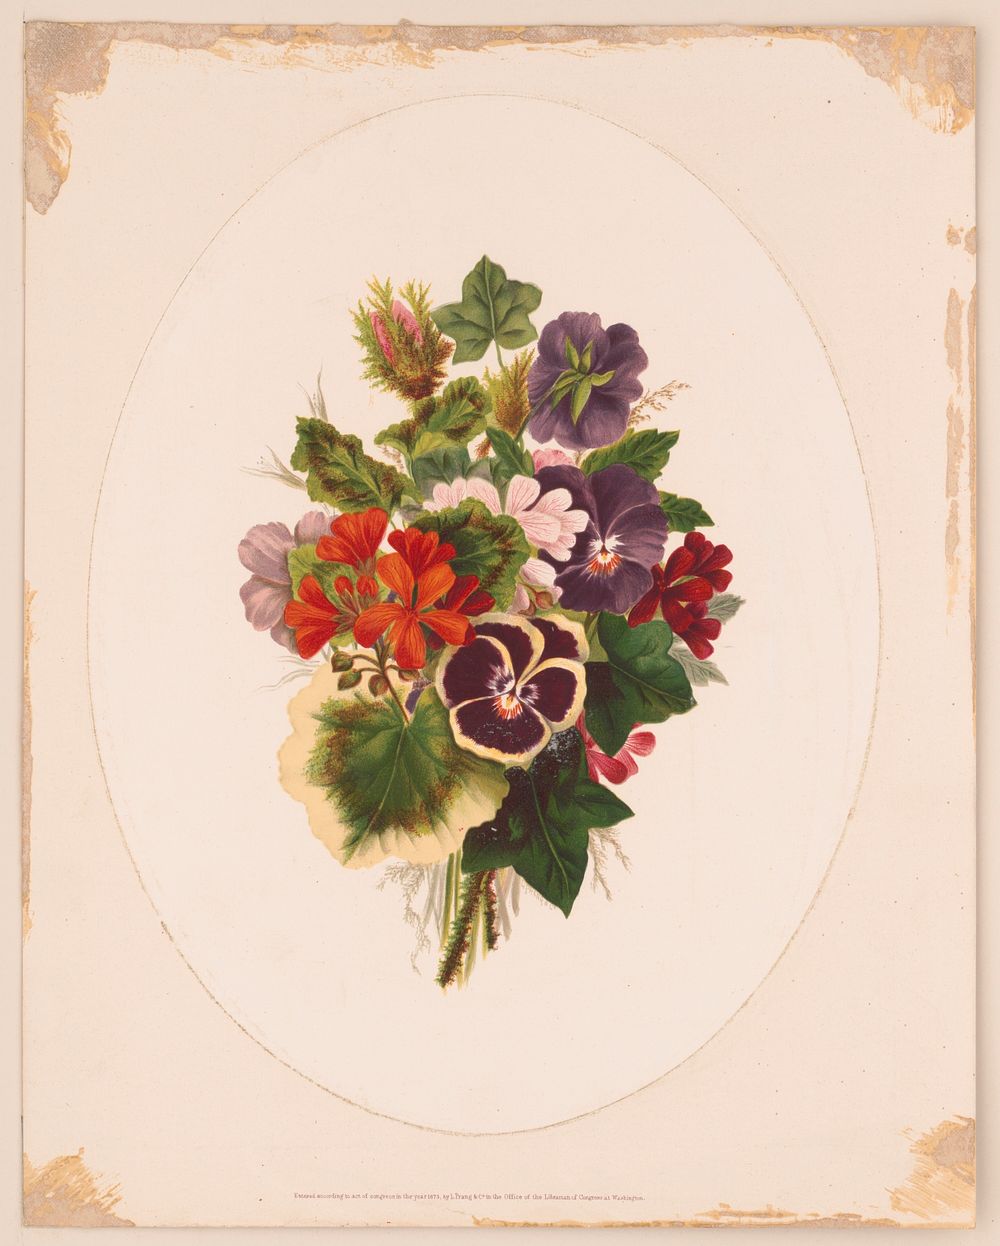 Bouquet of flowers (1873) by L. Prang & Co.